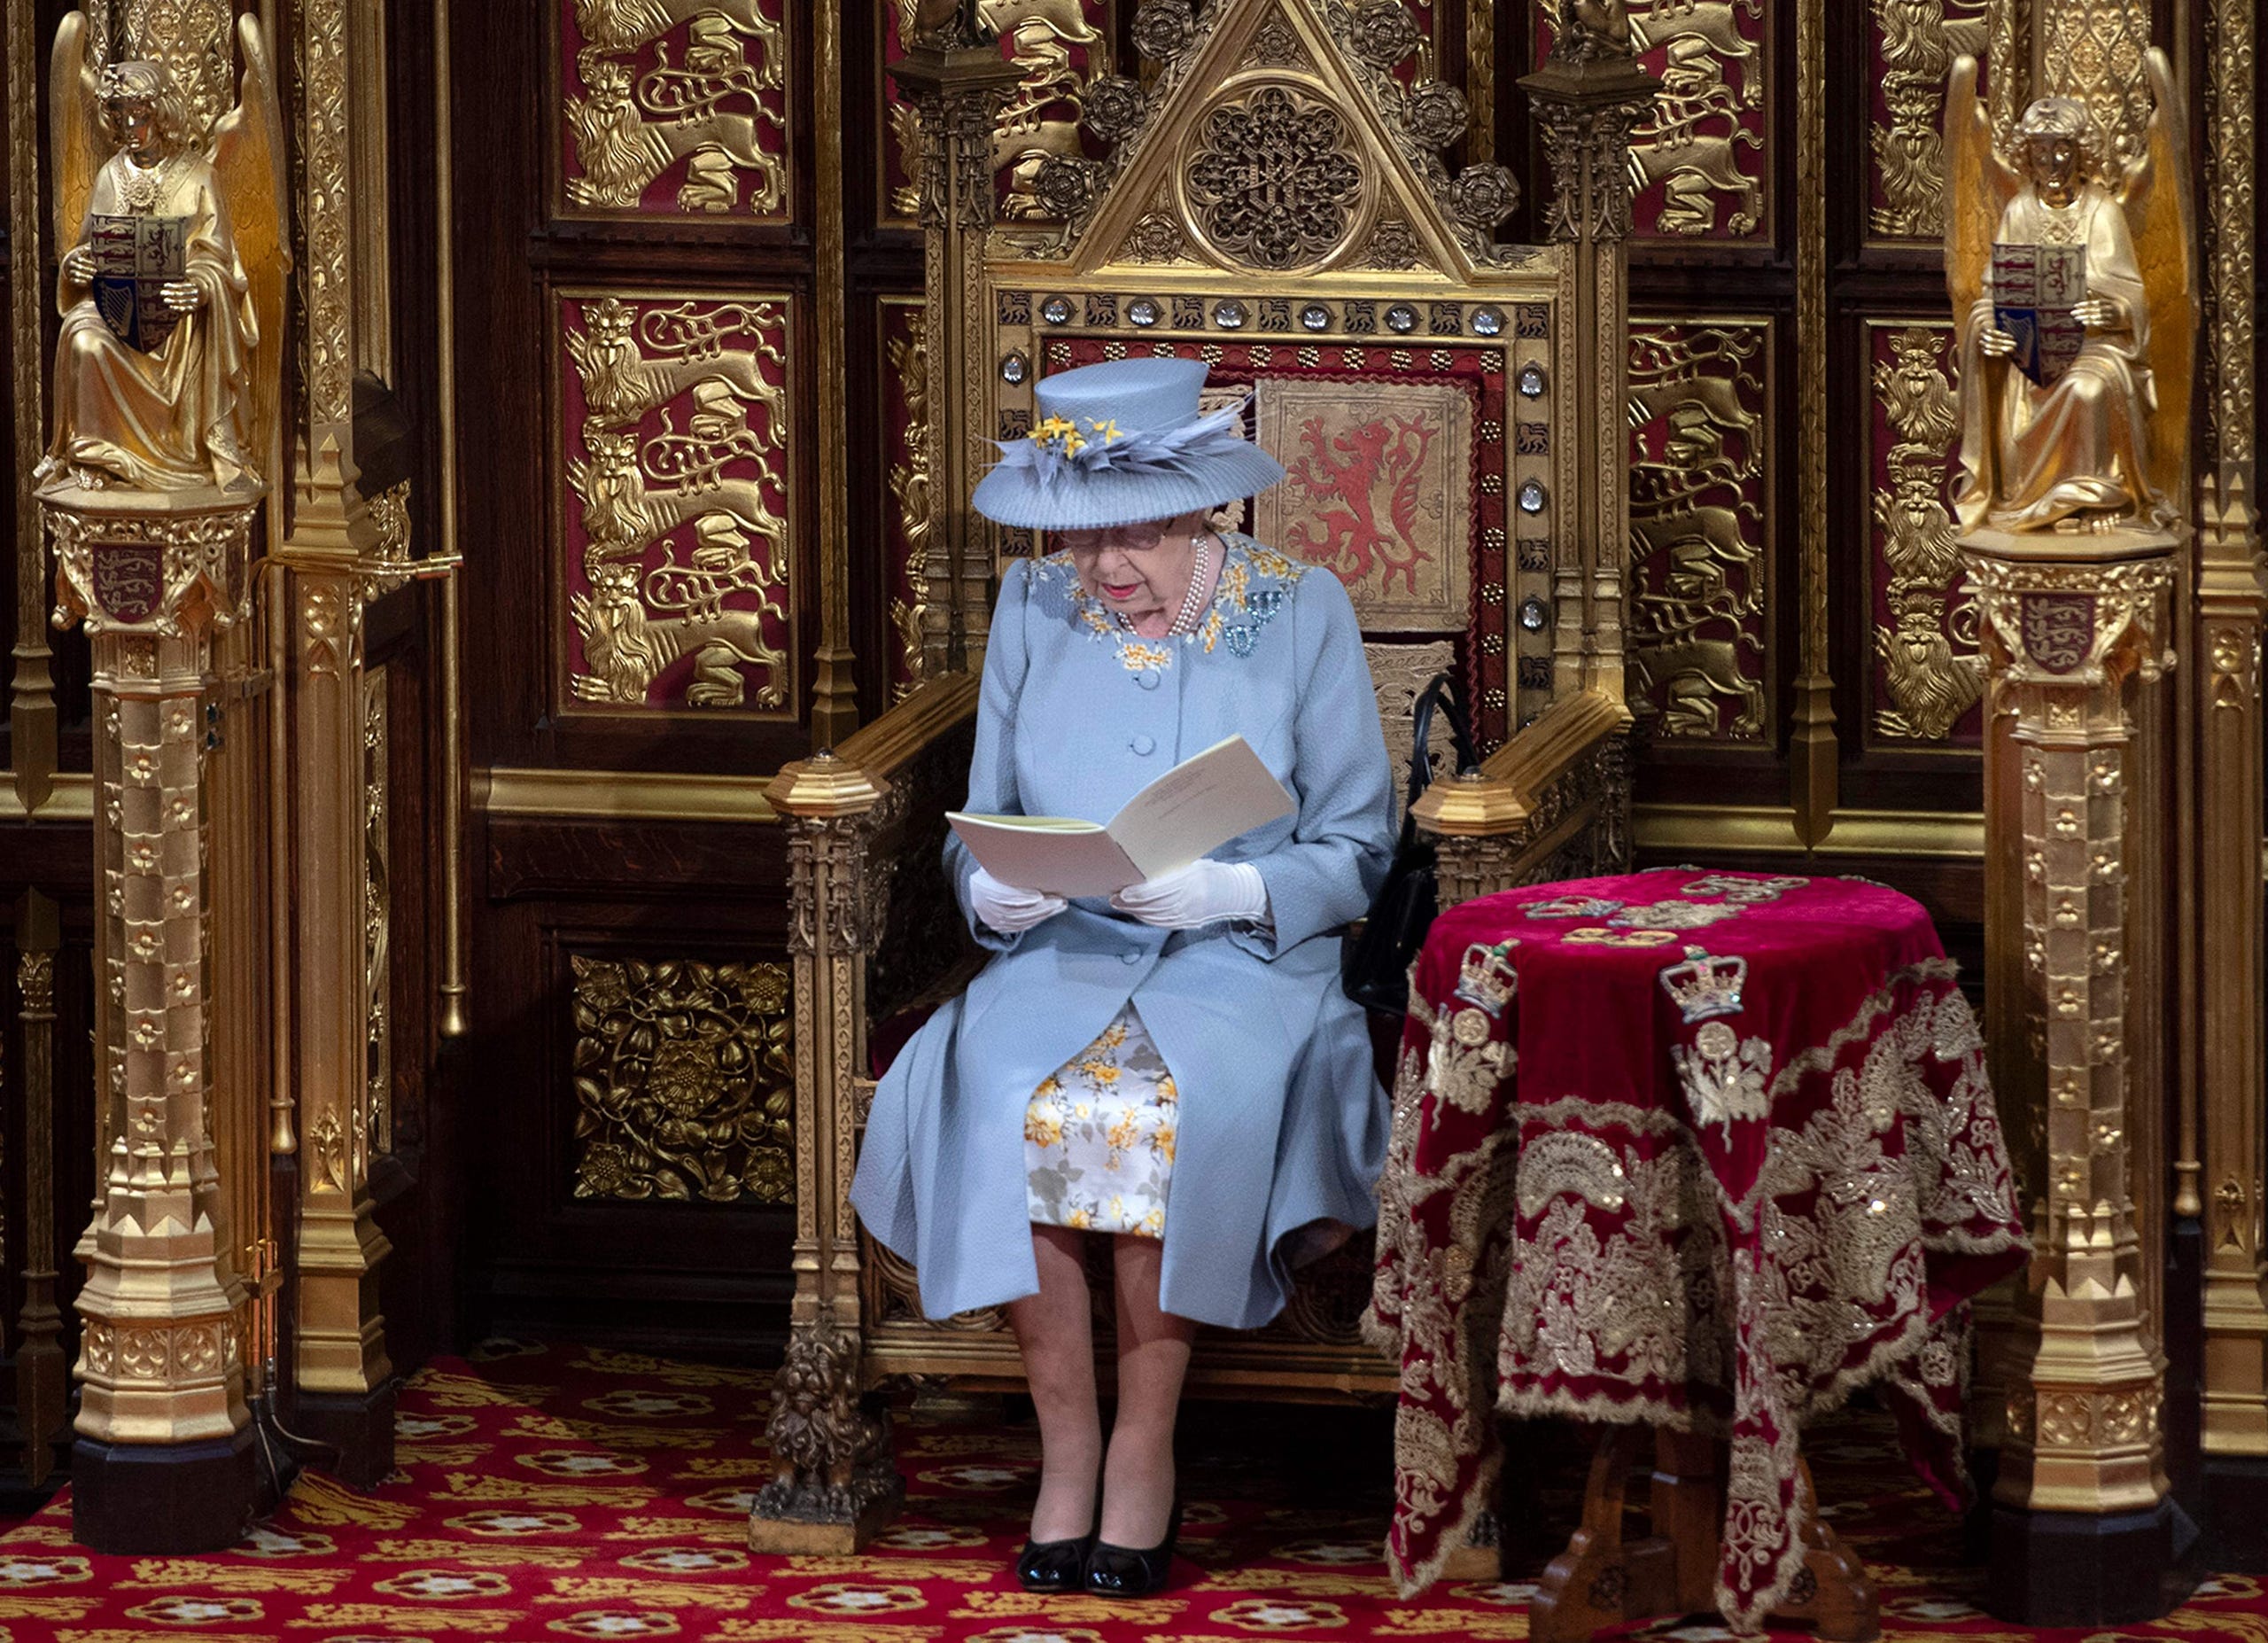 Queen Elizabeth II reads the Queen's Speech on the The Sovereign's Throne in the House of Lords during the State Opening of Parliament in London on May 11, 2021.